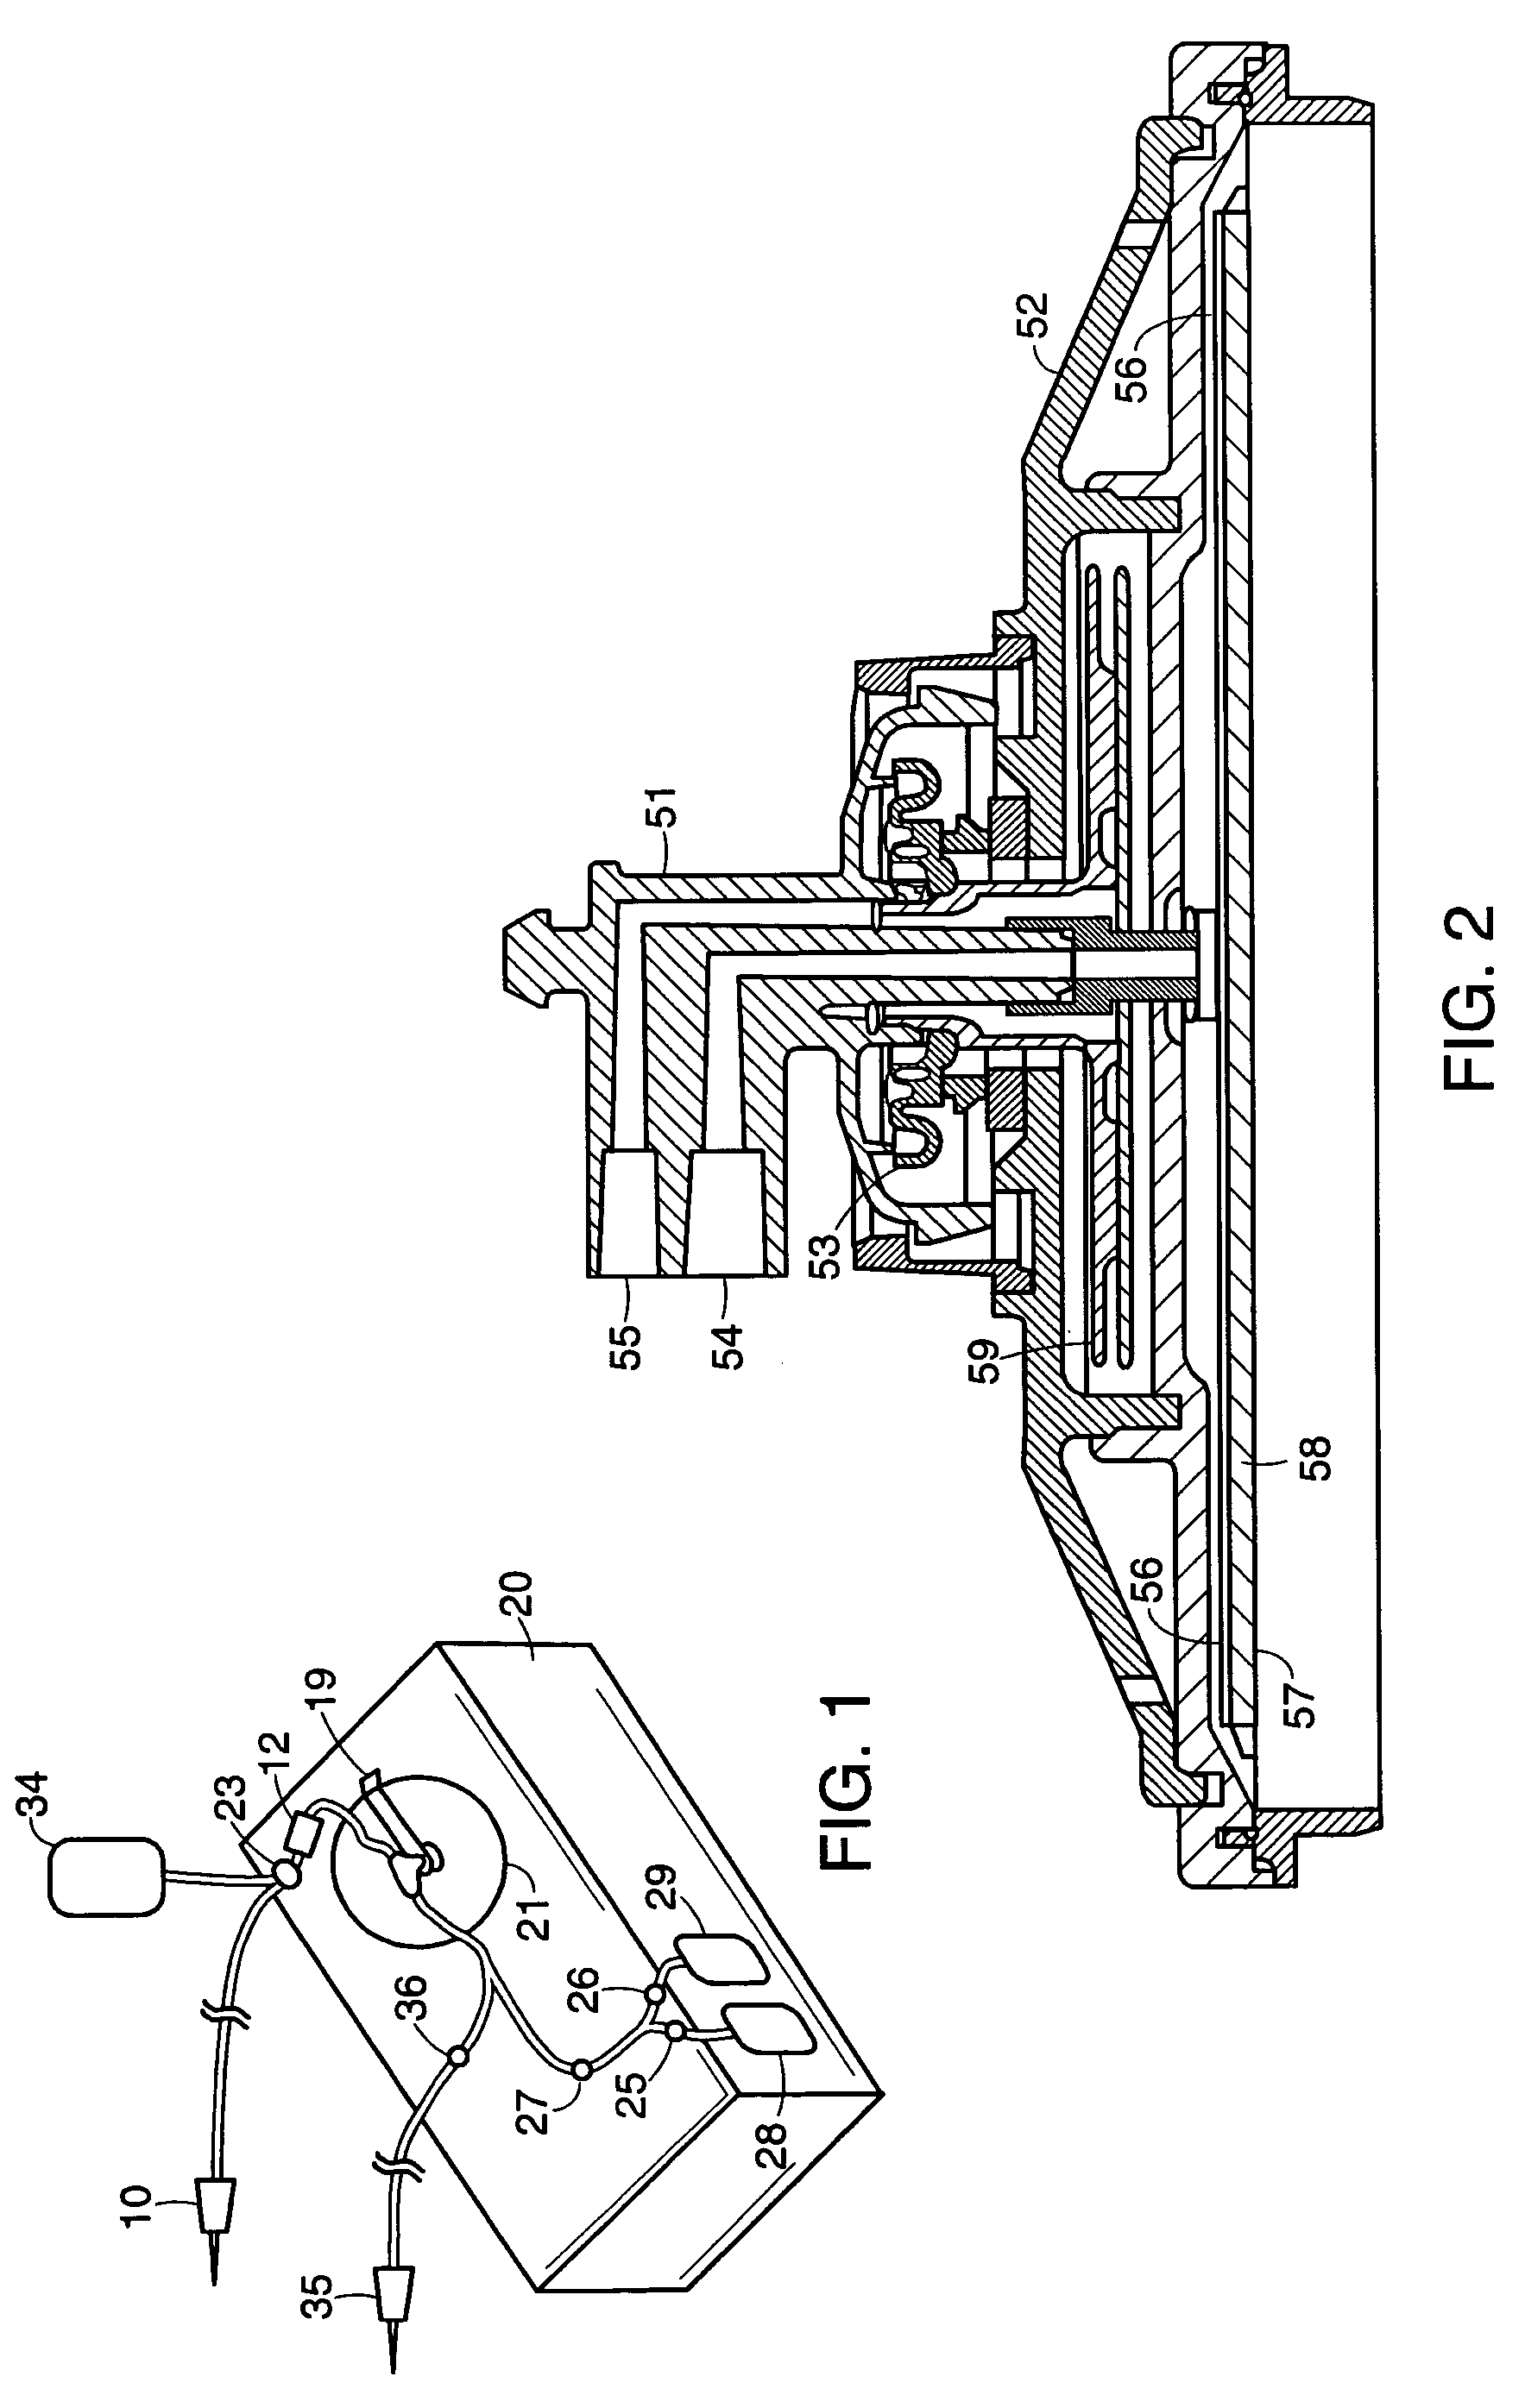 System and method for processing blood